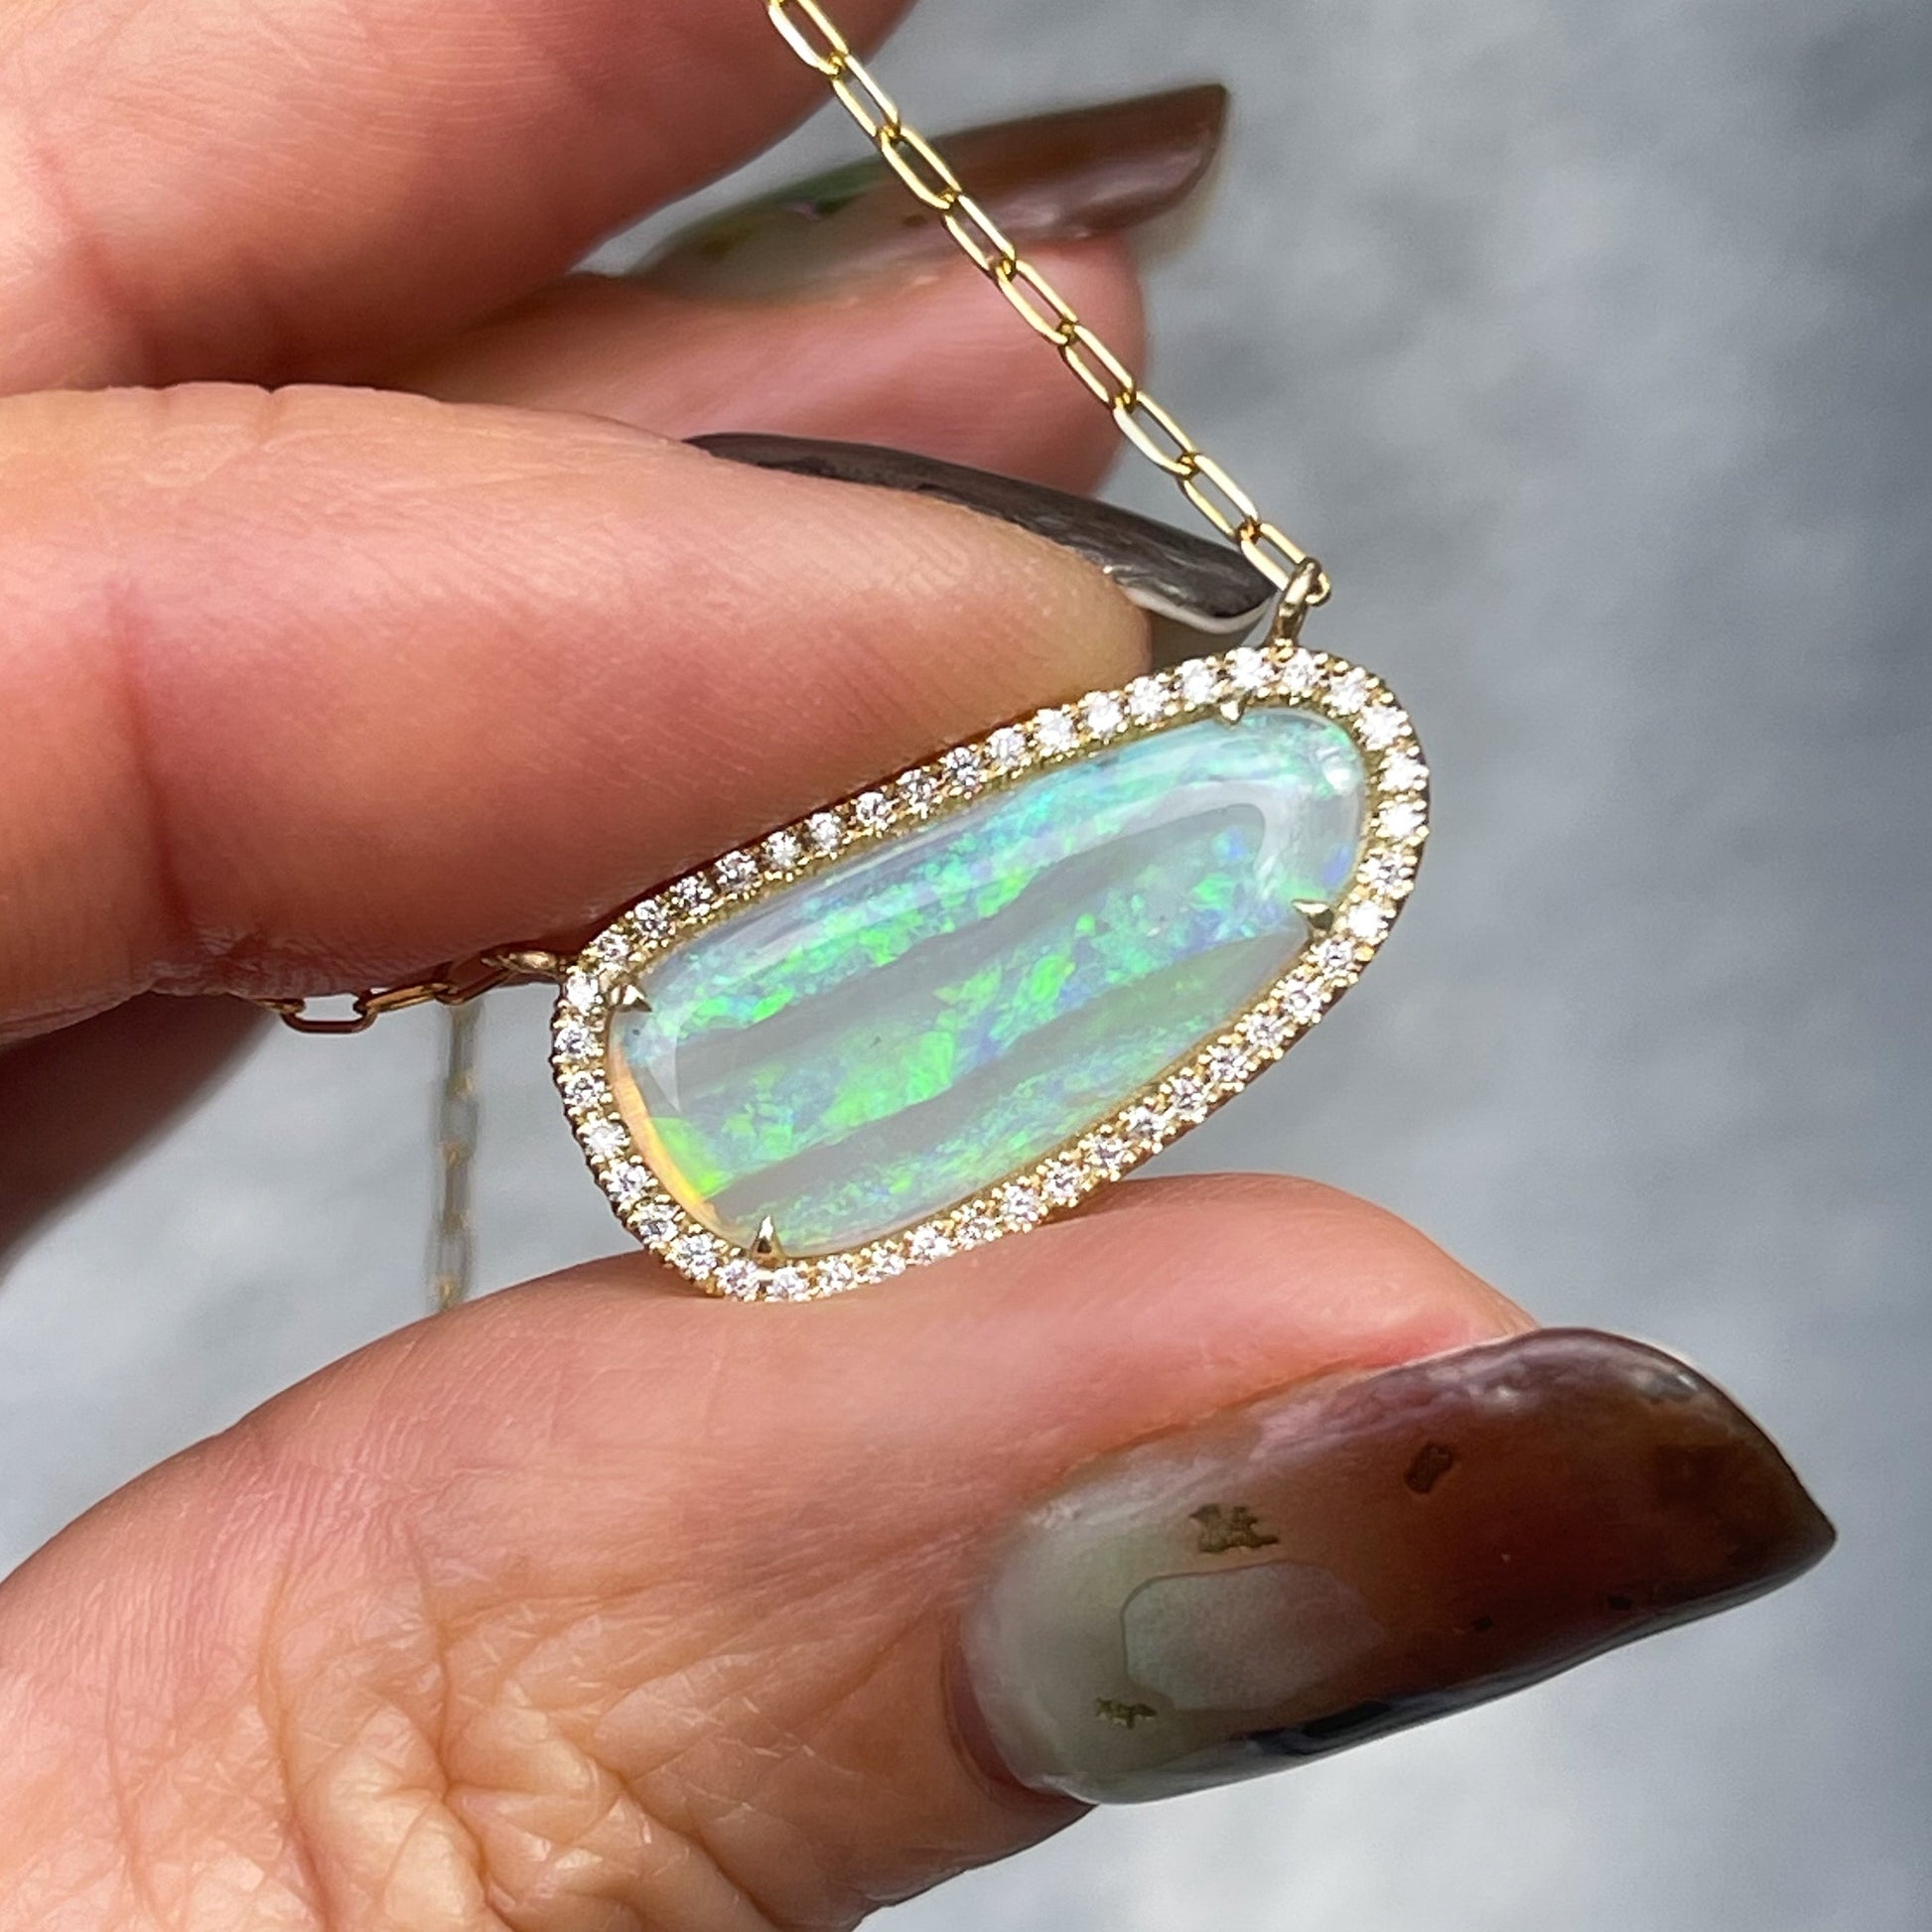 An Australian Opal Necklace by NIXIN Jewelry with a natural opal set in claw prongs. A gold opal necklace.